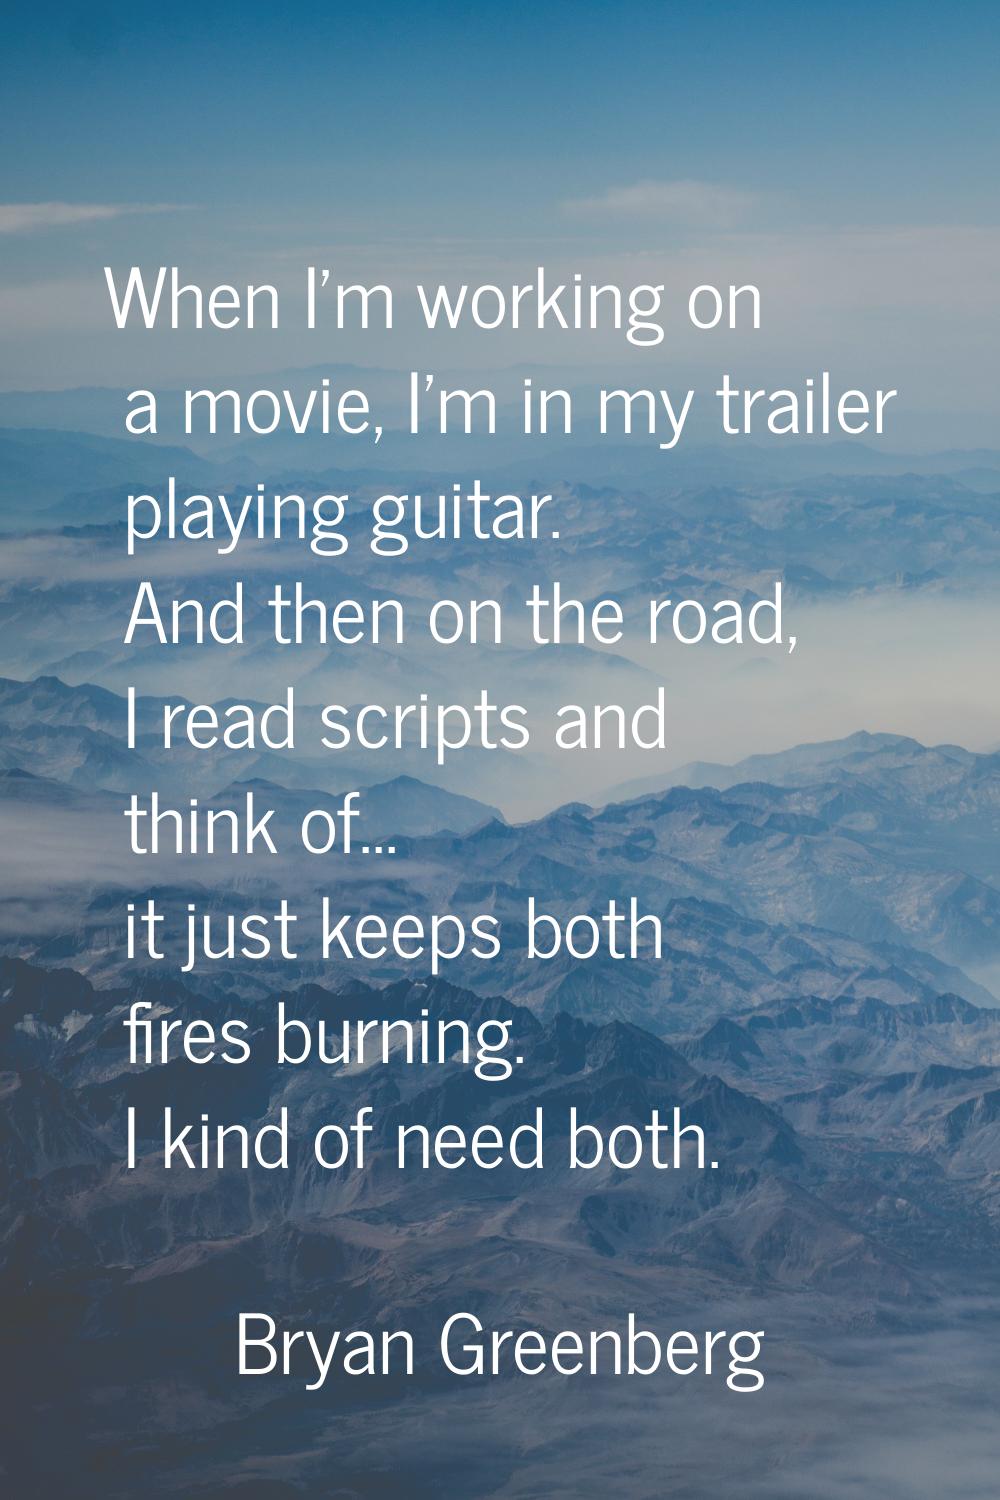 When I'm working on a movie, I'm in my trailer playing guitar. And then on the road, I read scripts